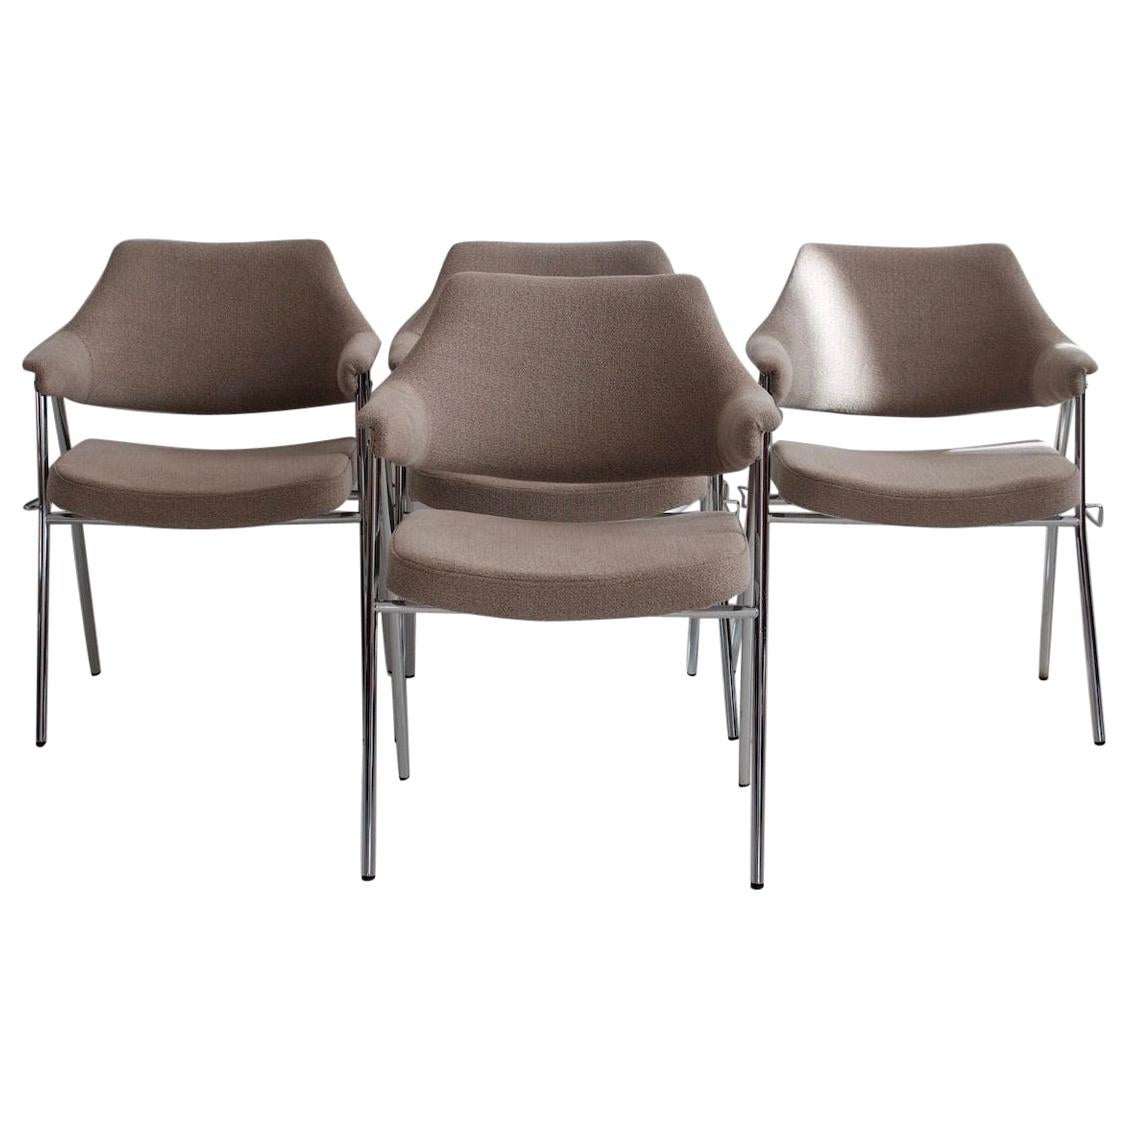 Set of Four S636 Chairs by Hanno von Gustedt for Thonet